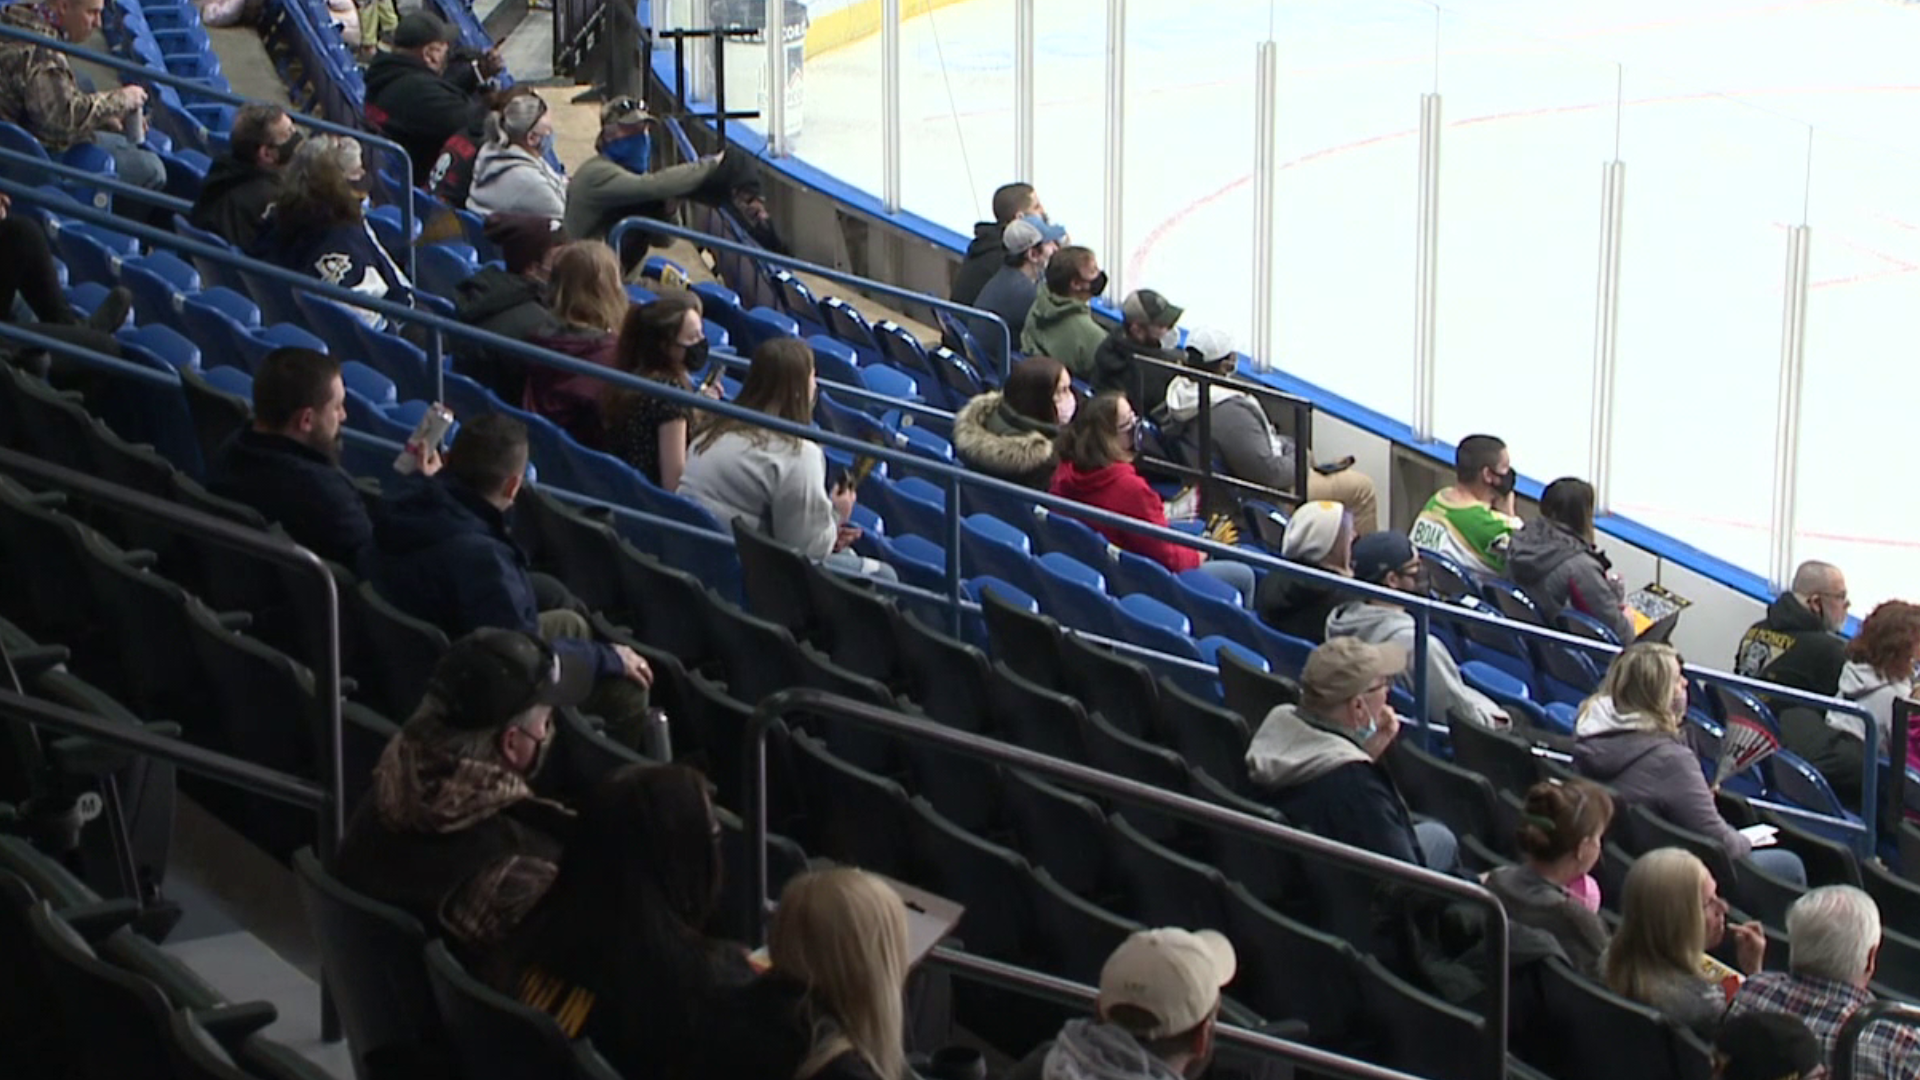 Friday marked the first time in a year fans could watch the Wilkes-Barre/Scranton Penguins.